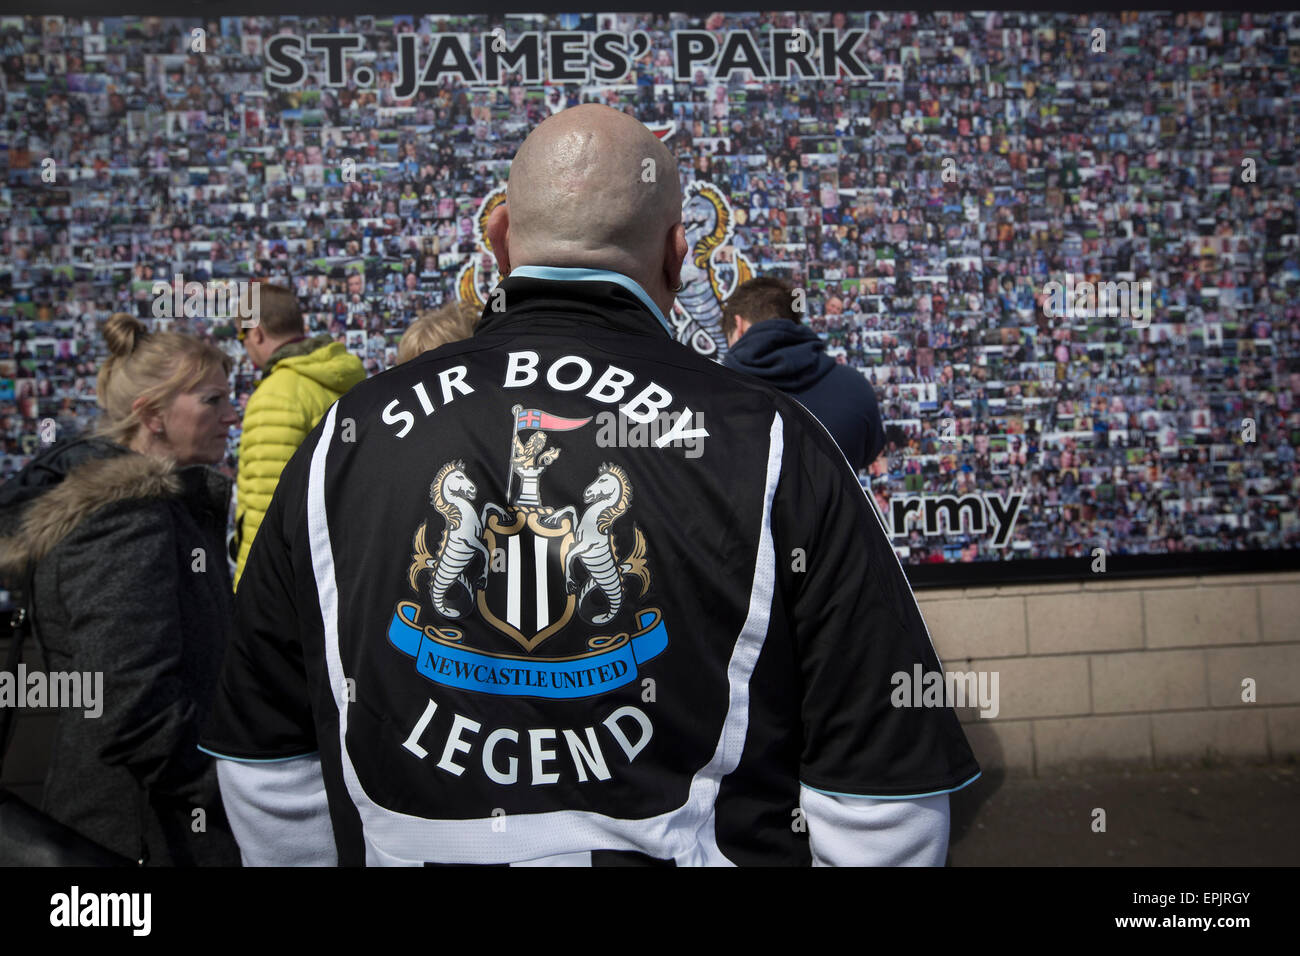 Supporters gathering by a montage of photos on a wall at the Gallowgate end of the stadium before Newcastle United host Tottenham Hotspurs in an English Premier League match at St. James' Park. The match was boycotted by a section of the home support critical of the role of owner Mike Ashley and sponsorship by a payday loan company. The match was won by Spurs by 3-1, watched by 47,427, the lowest league gate of the season at the stadium. Stock Photo